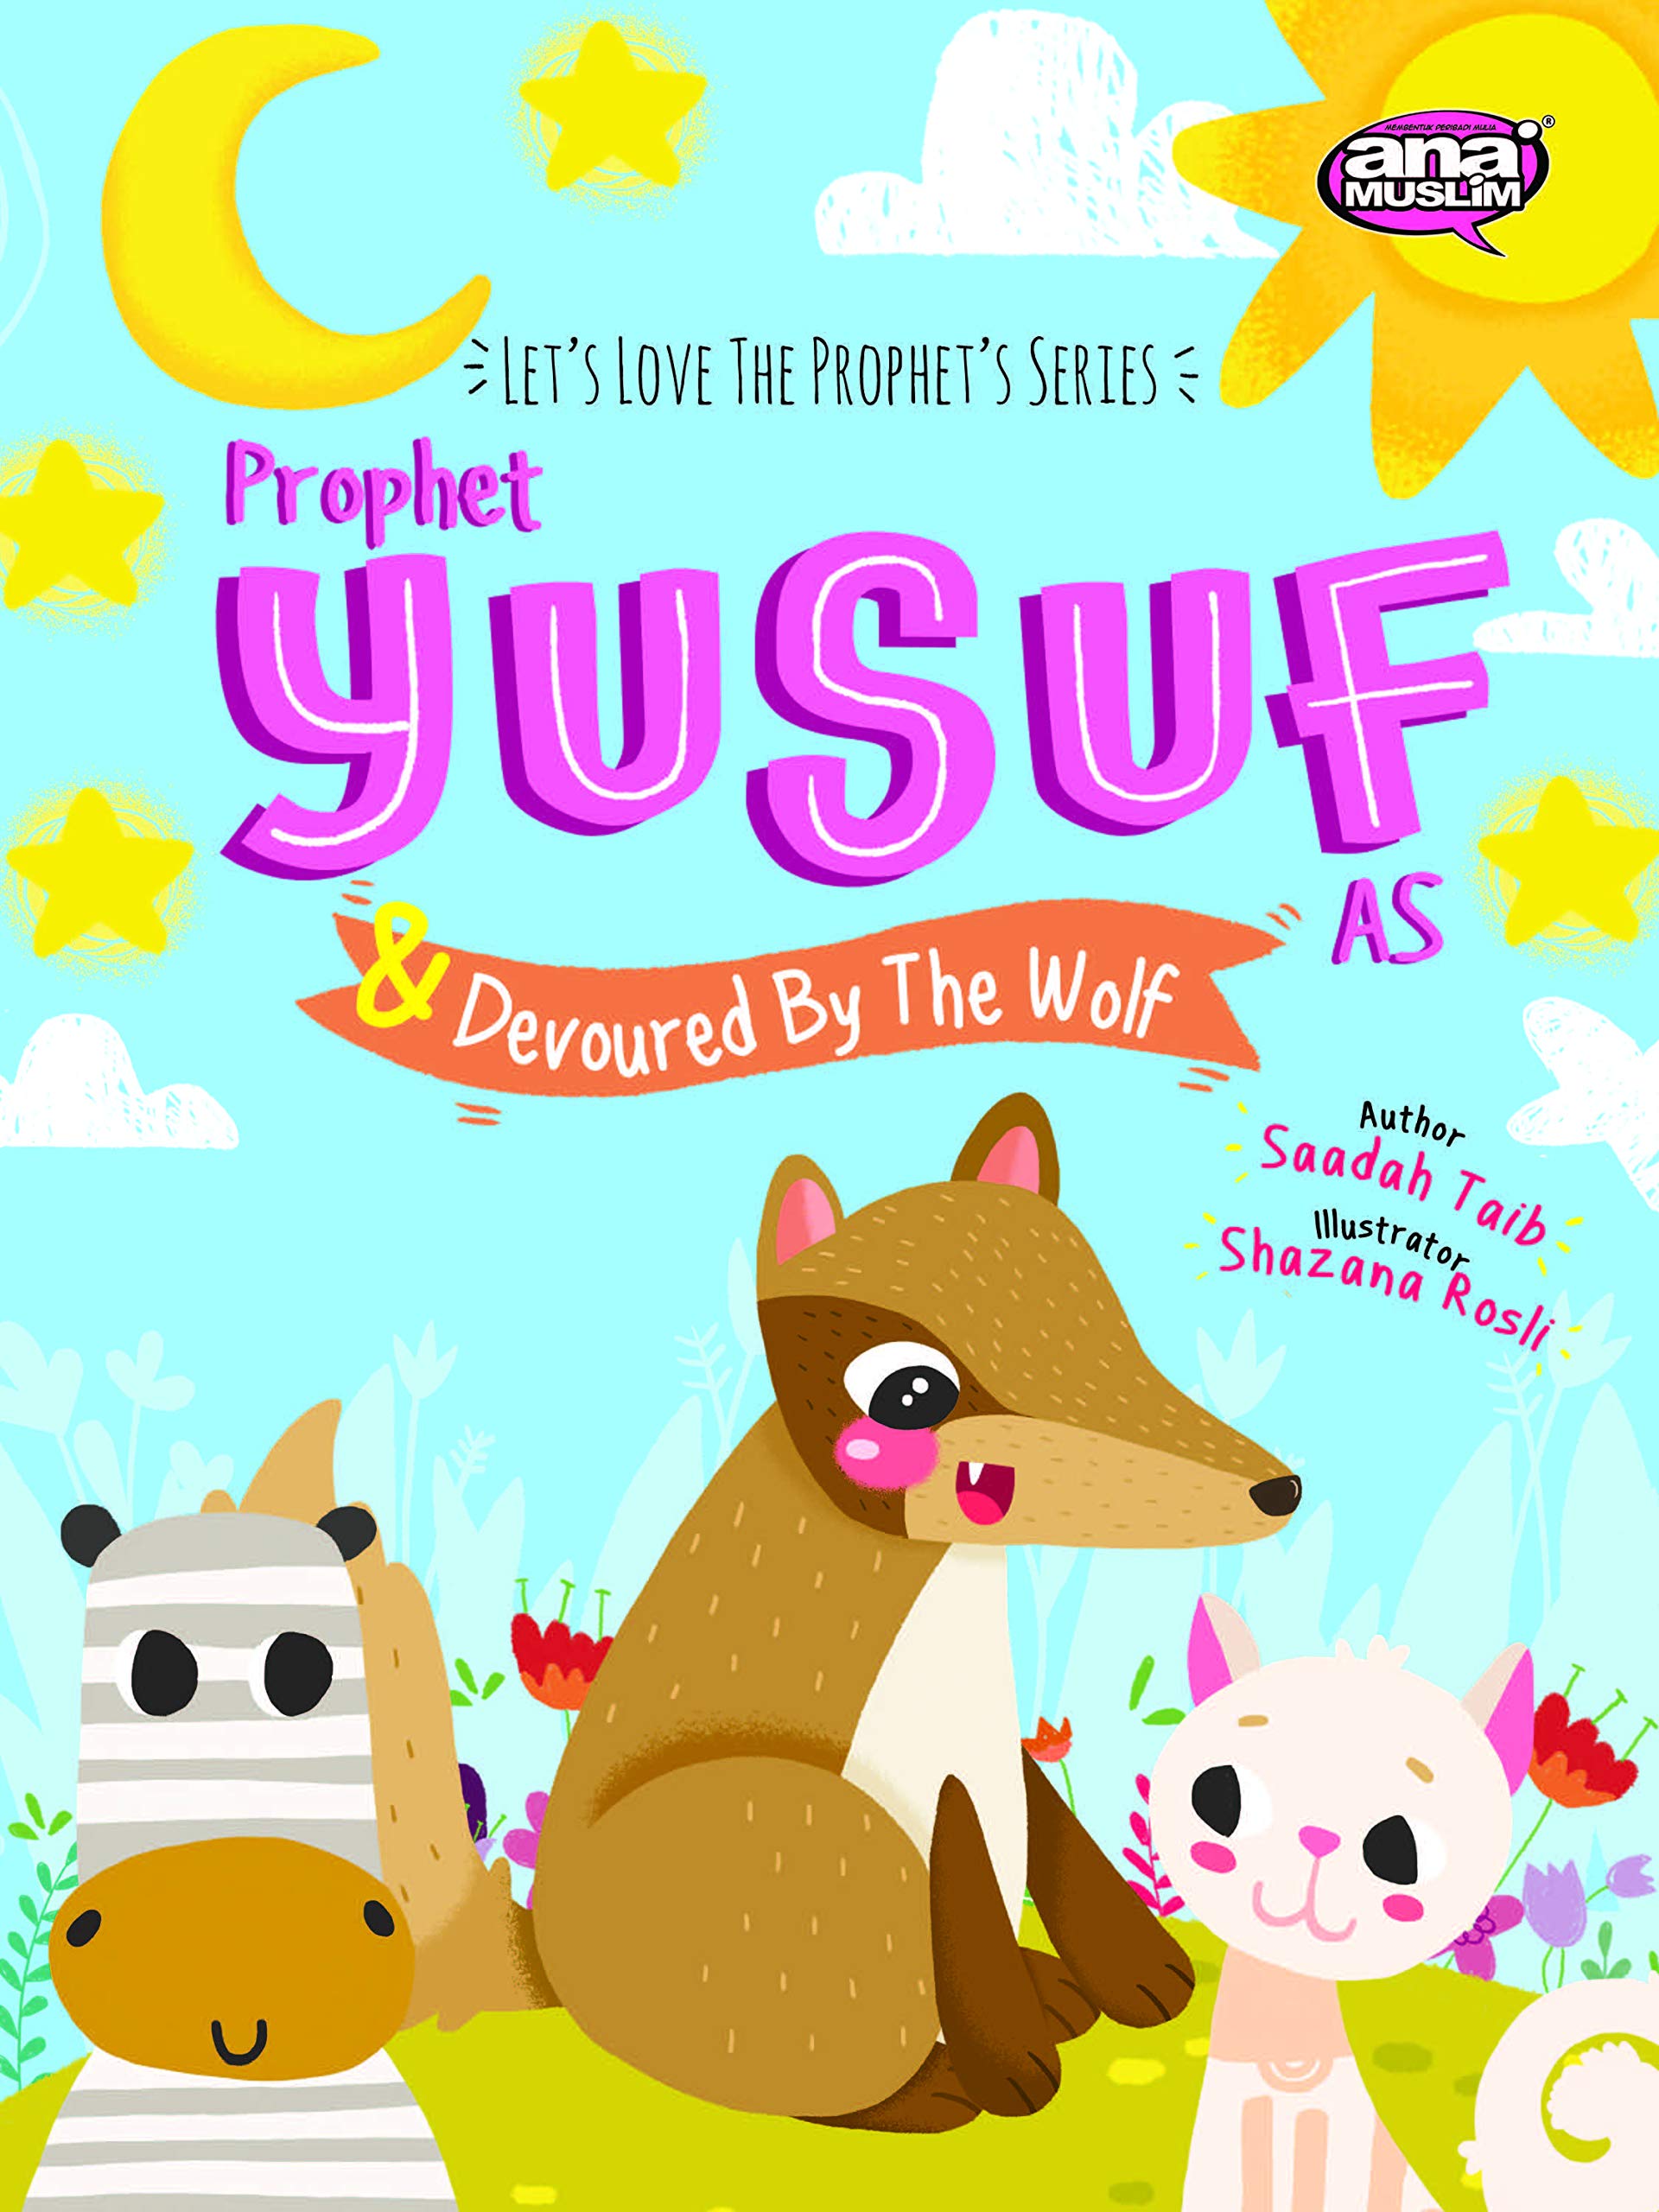 The Prophets of Islam Activity Book- Prophet Yusuf Devoured by the Wolf